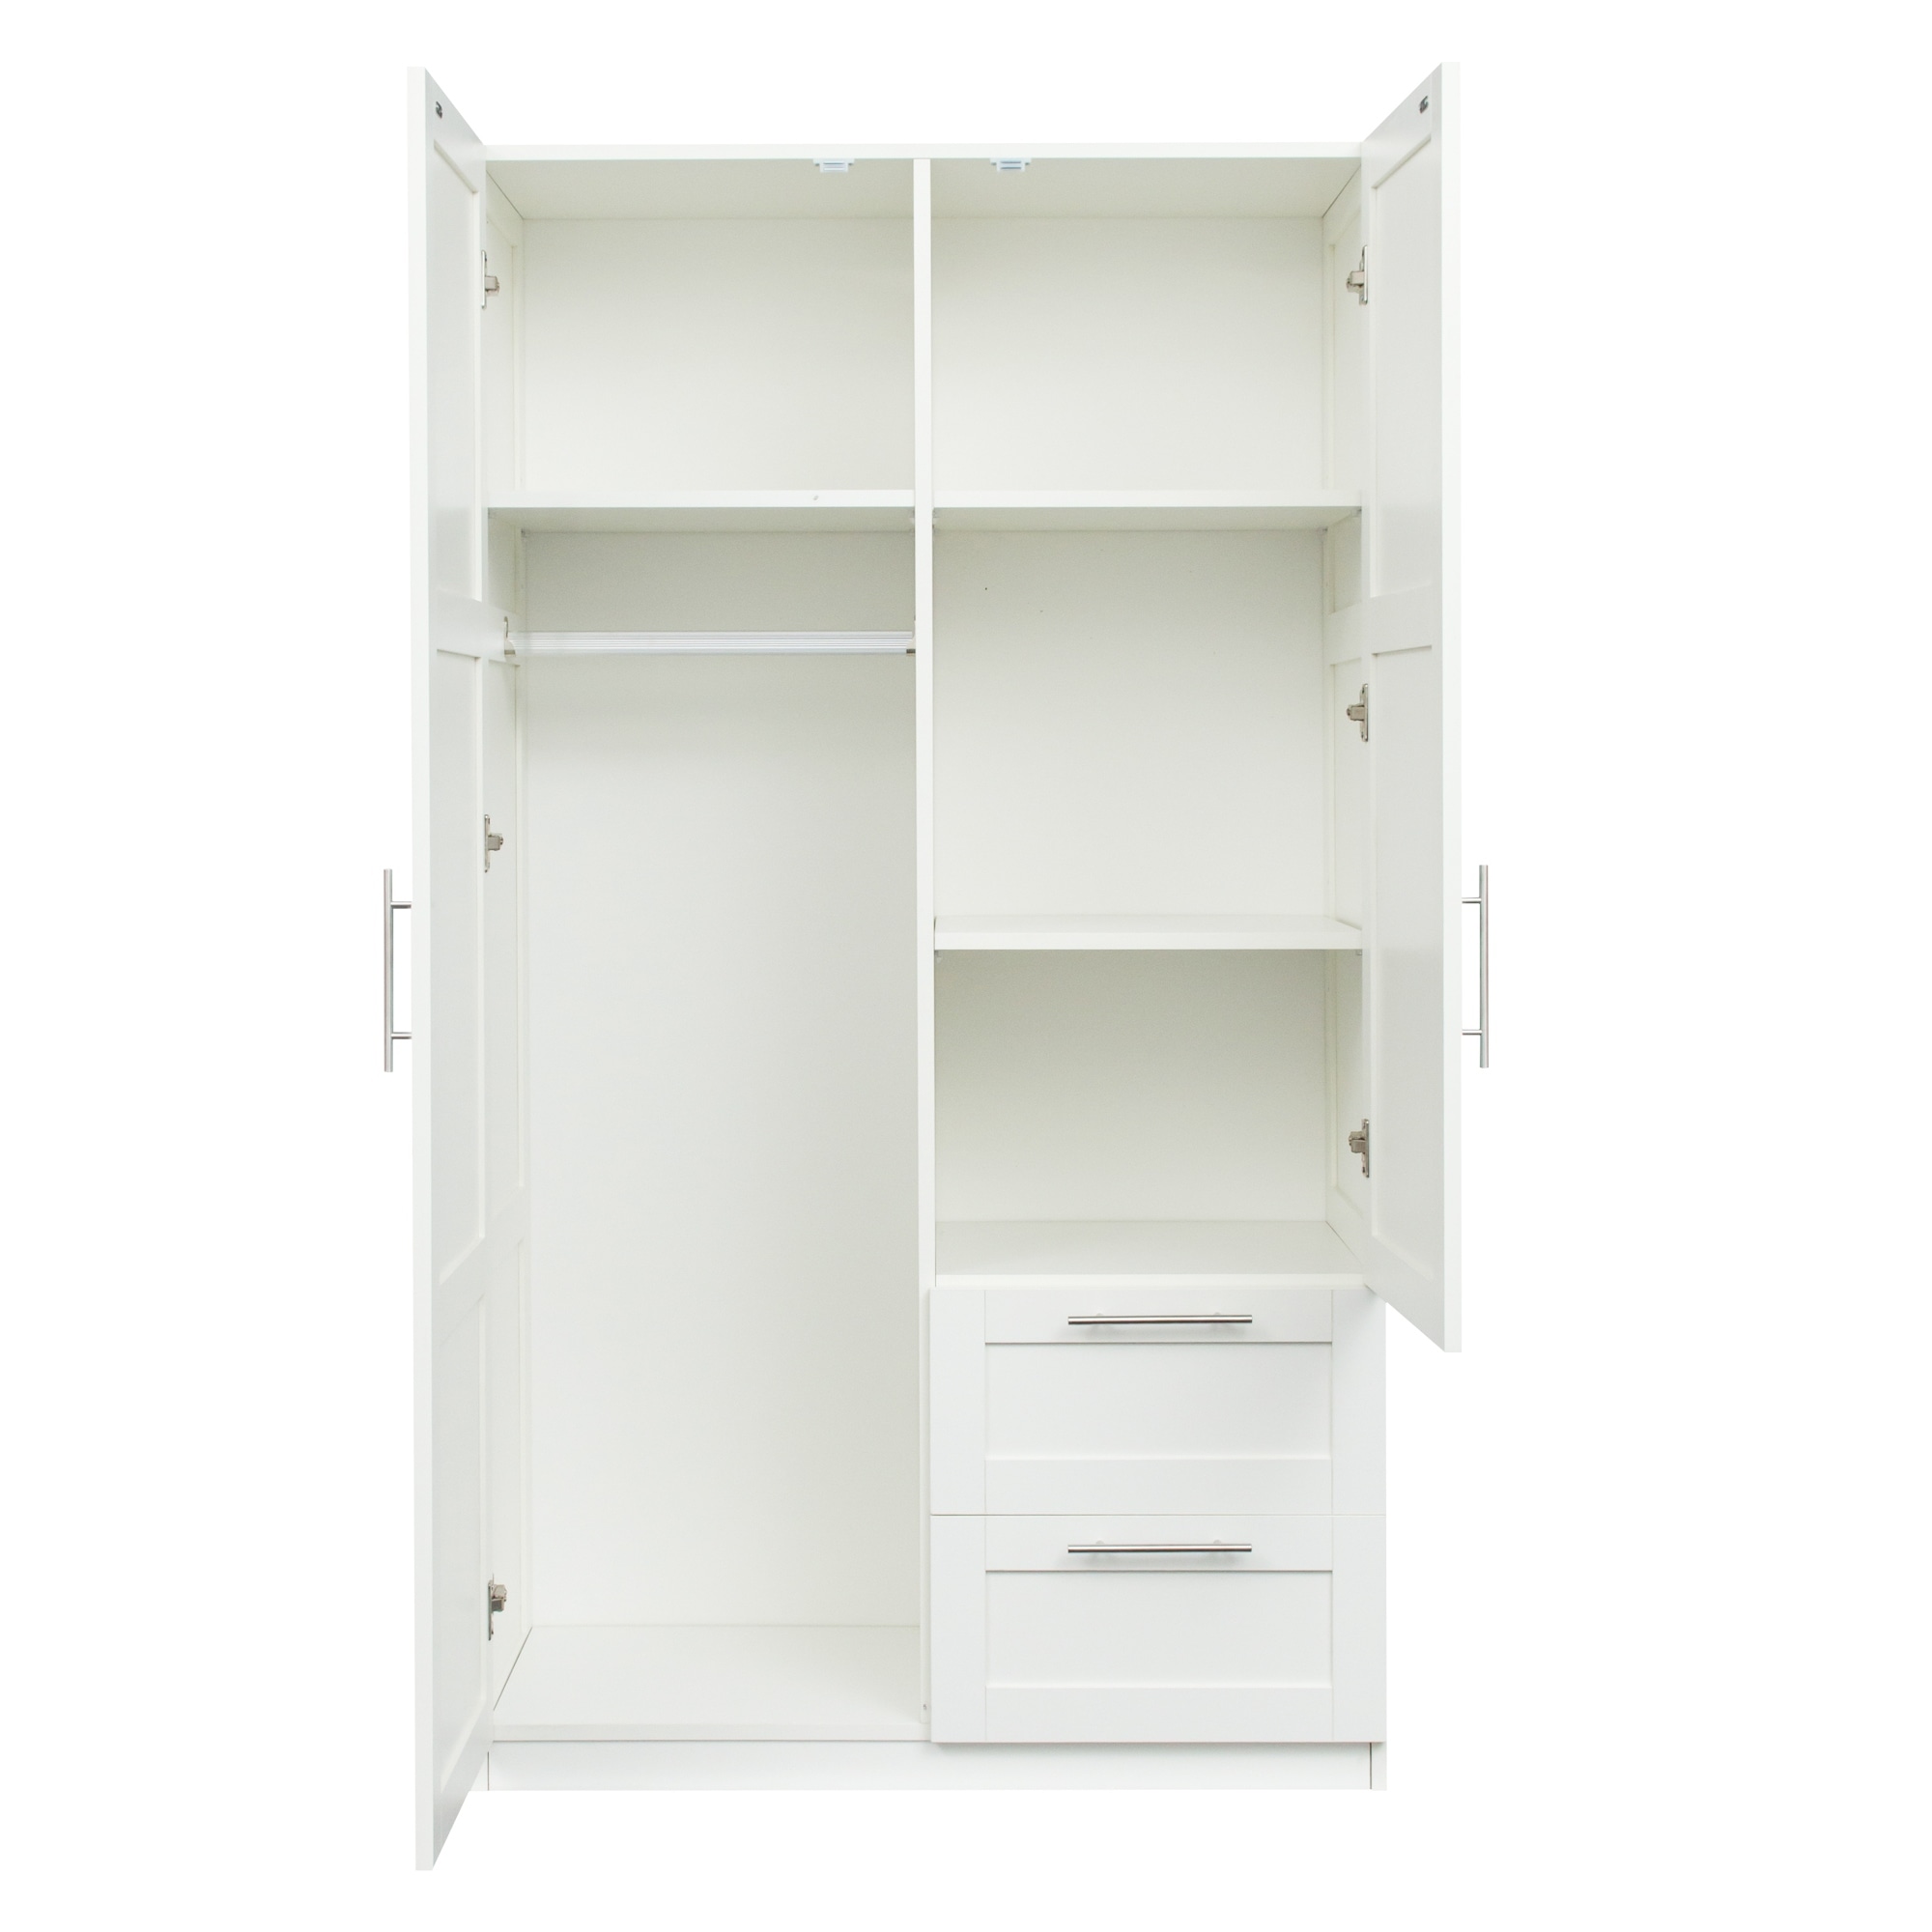 https://ak1.ostkcdn.com/images/products/is/images/direct/4d6aedb8b6fe4cbe8eba6a352cf26cd424c3602d/High-Wardrobe-And-Kitchen-Cabinet-With-2-Doors%2C-2-Drawers-And-5-Storage-Spaces.jpg